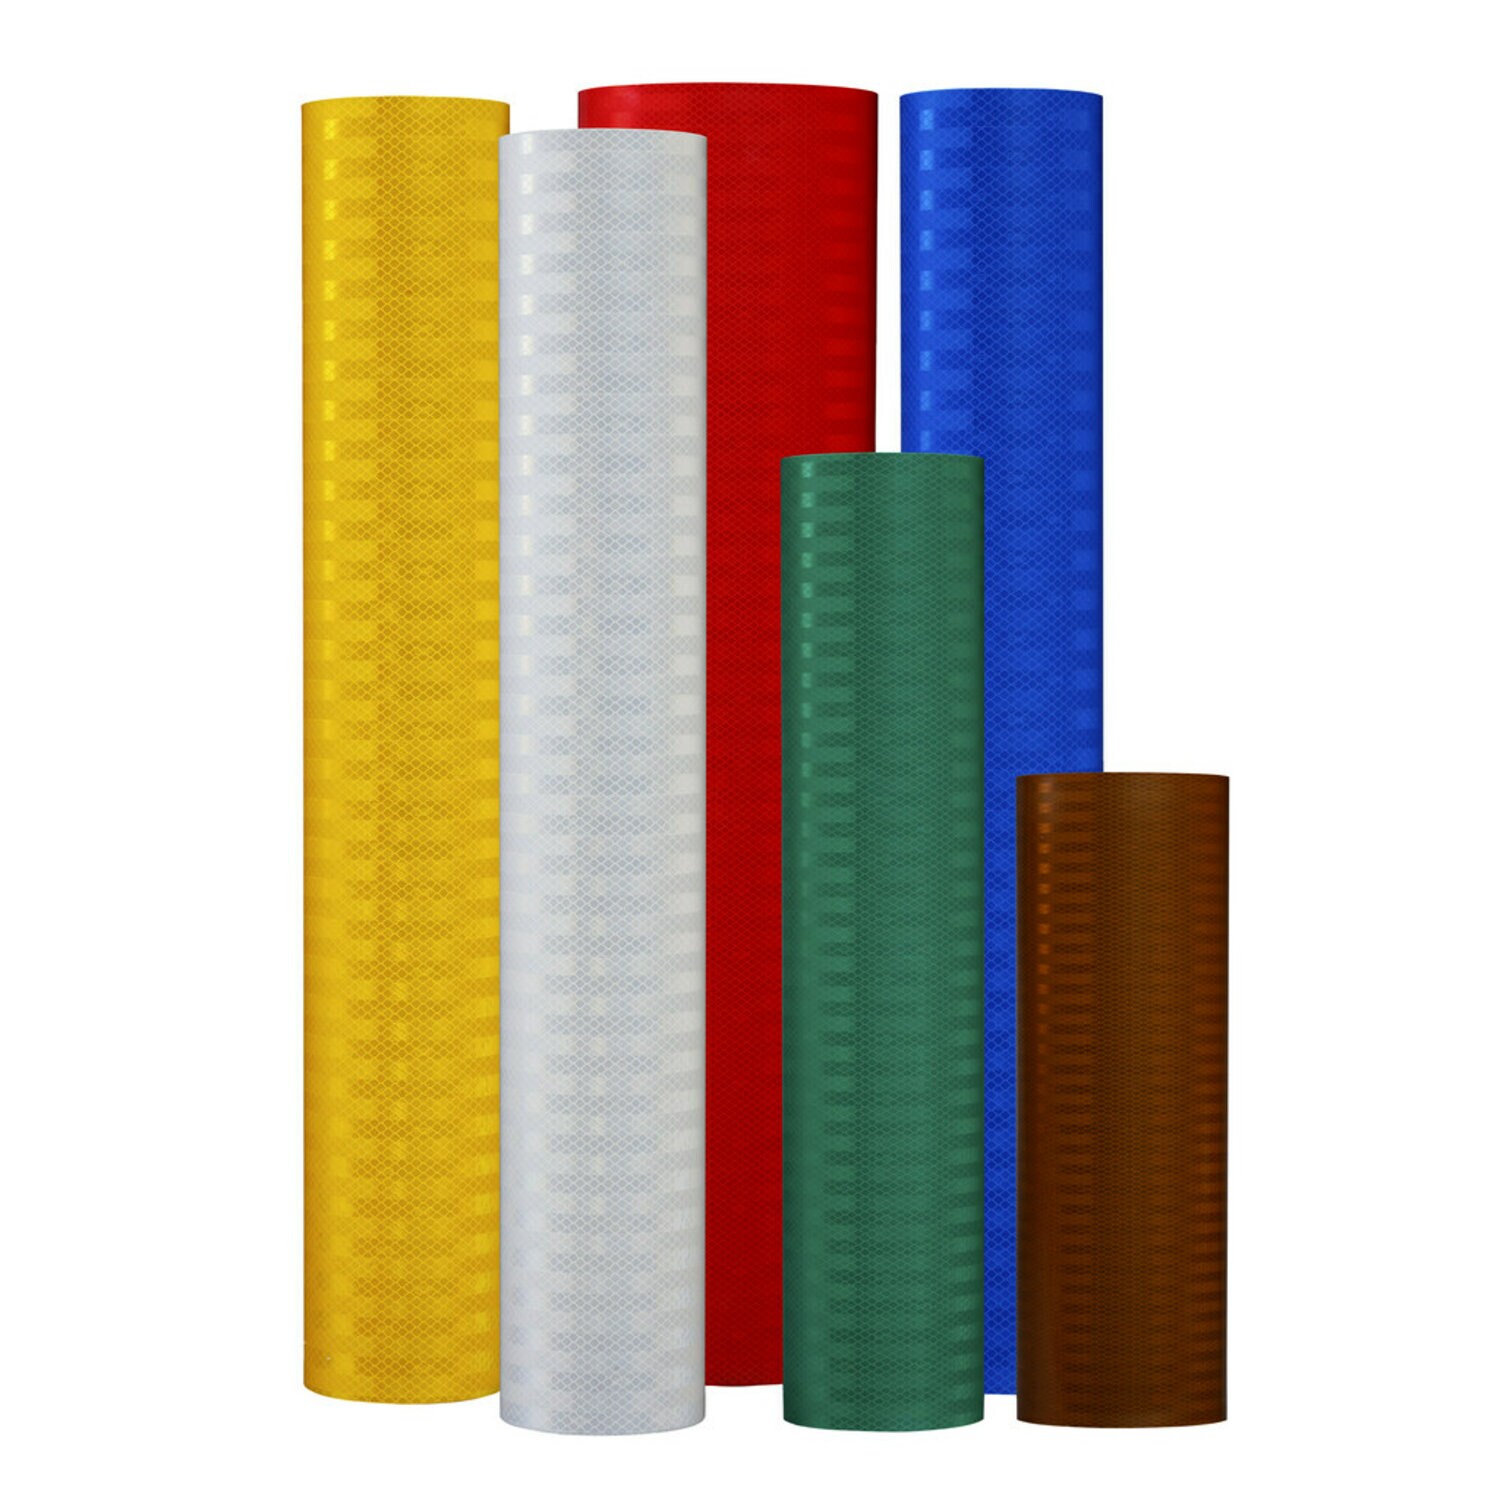 7000038263 - 3M Engineer Grade Prismatic Reflective Sheeting 3431, Yellow, 36 in x
50 yd, 1 Roll/Case